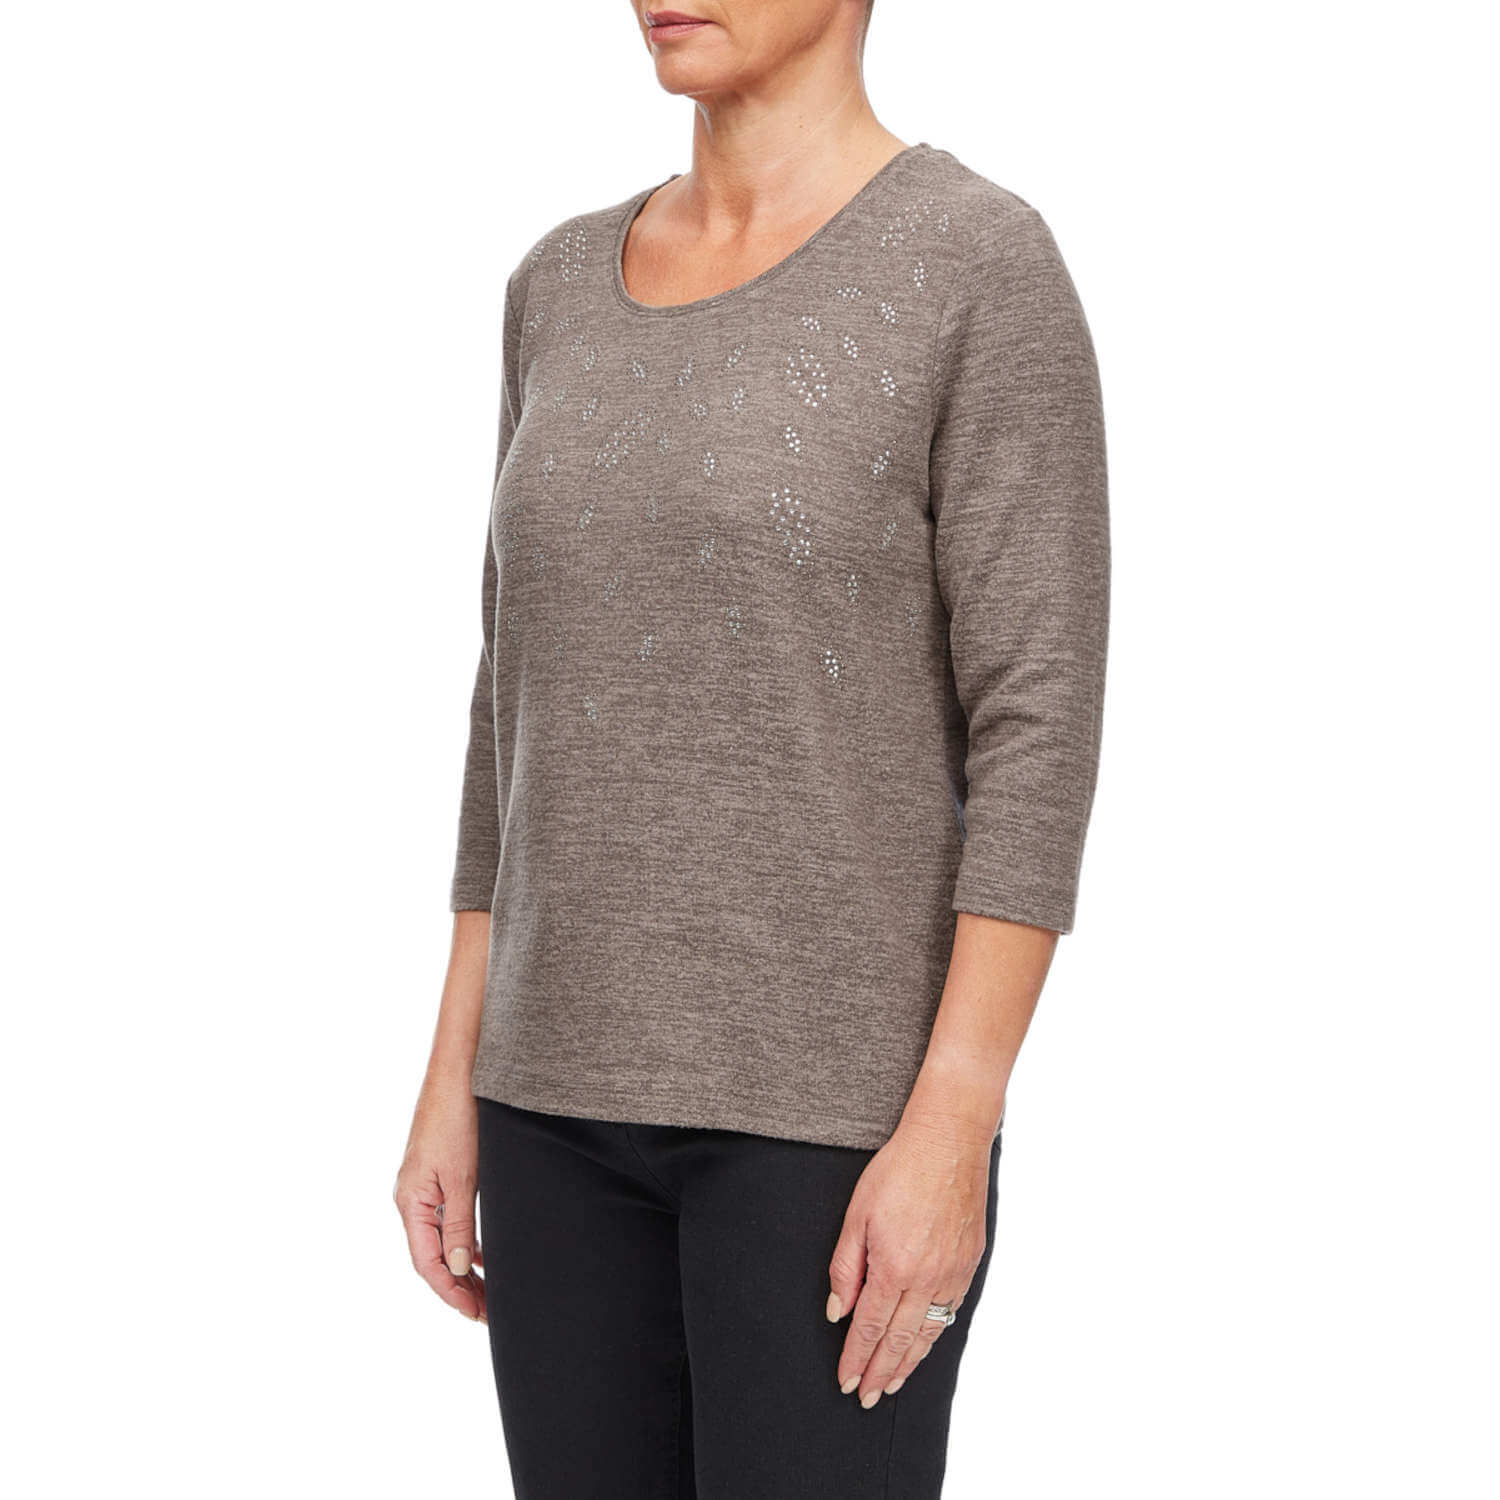 Tigiwear Leaf Embellished Top - Taupe 2 Shaws Department Stores